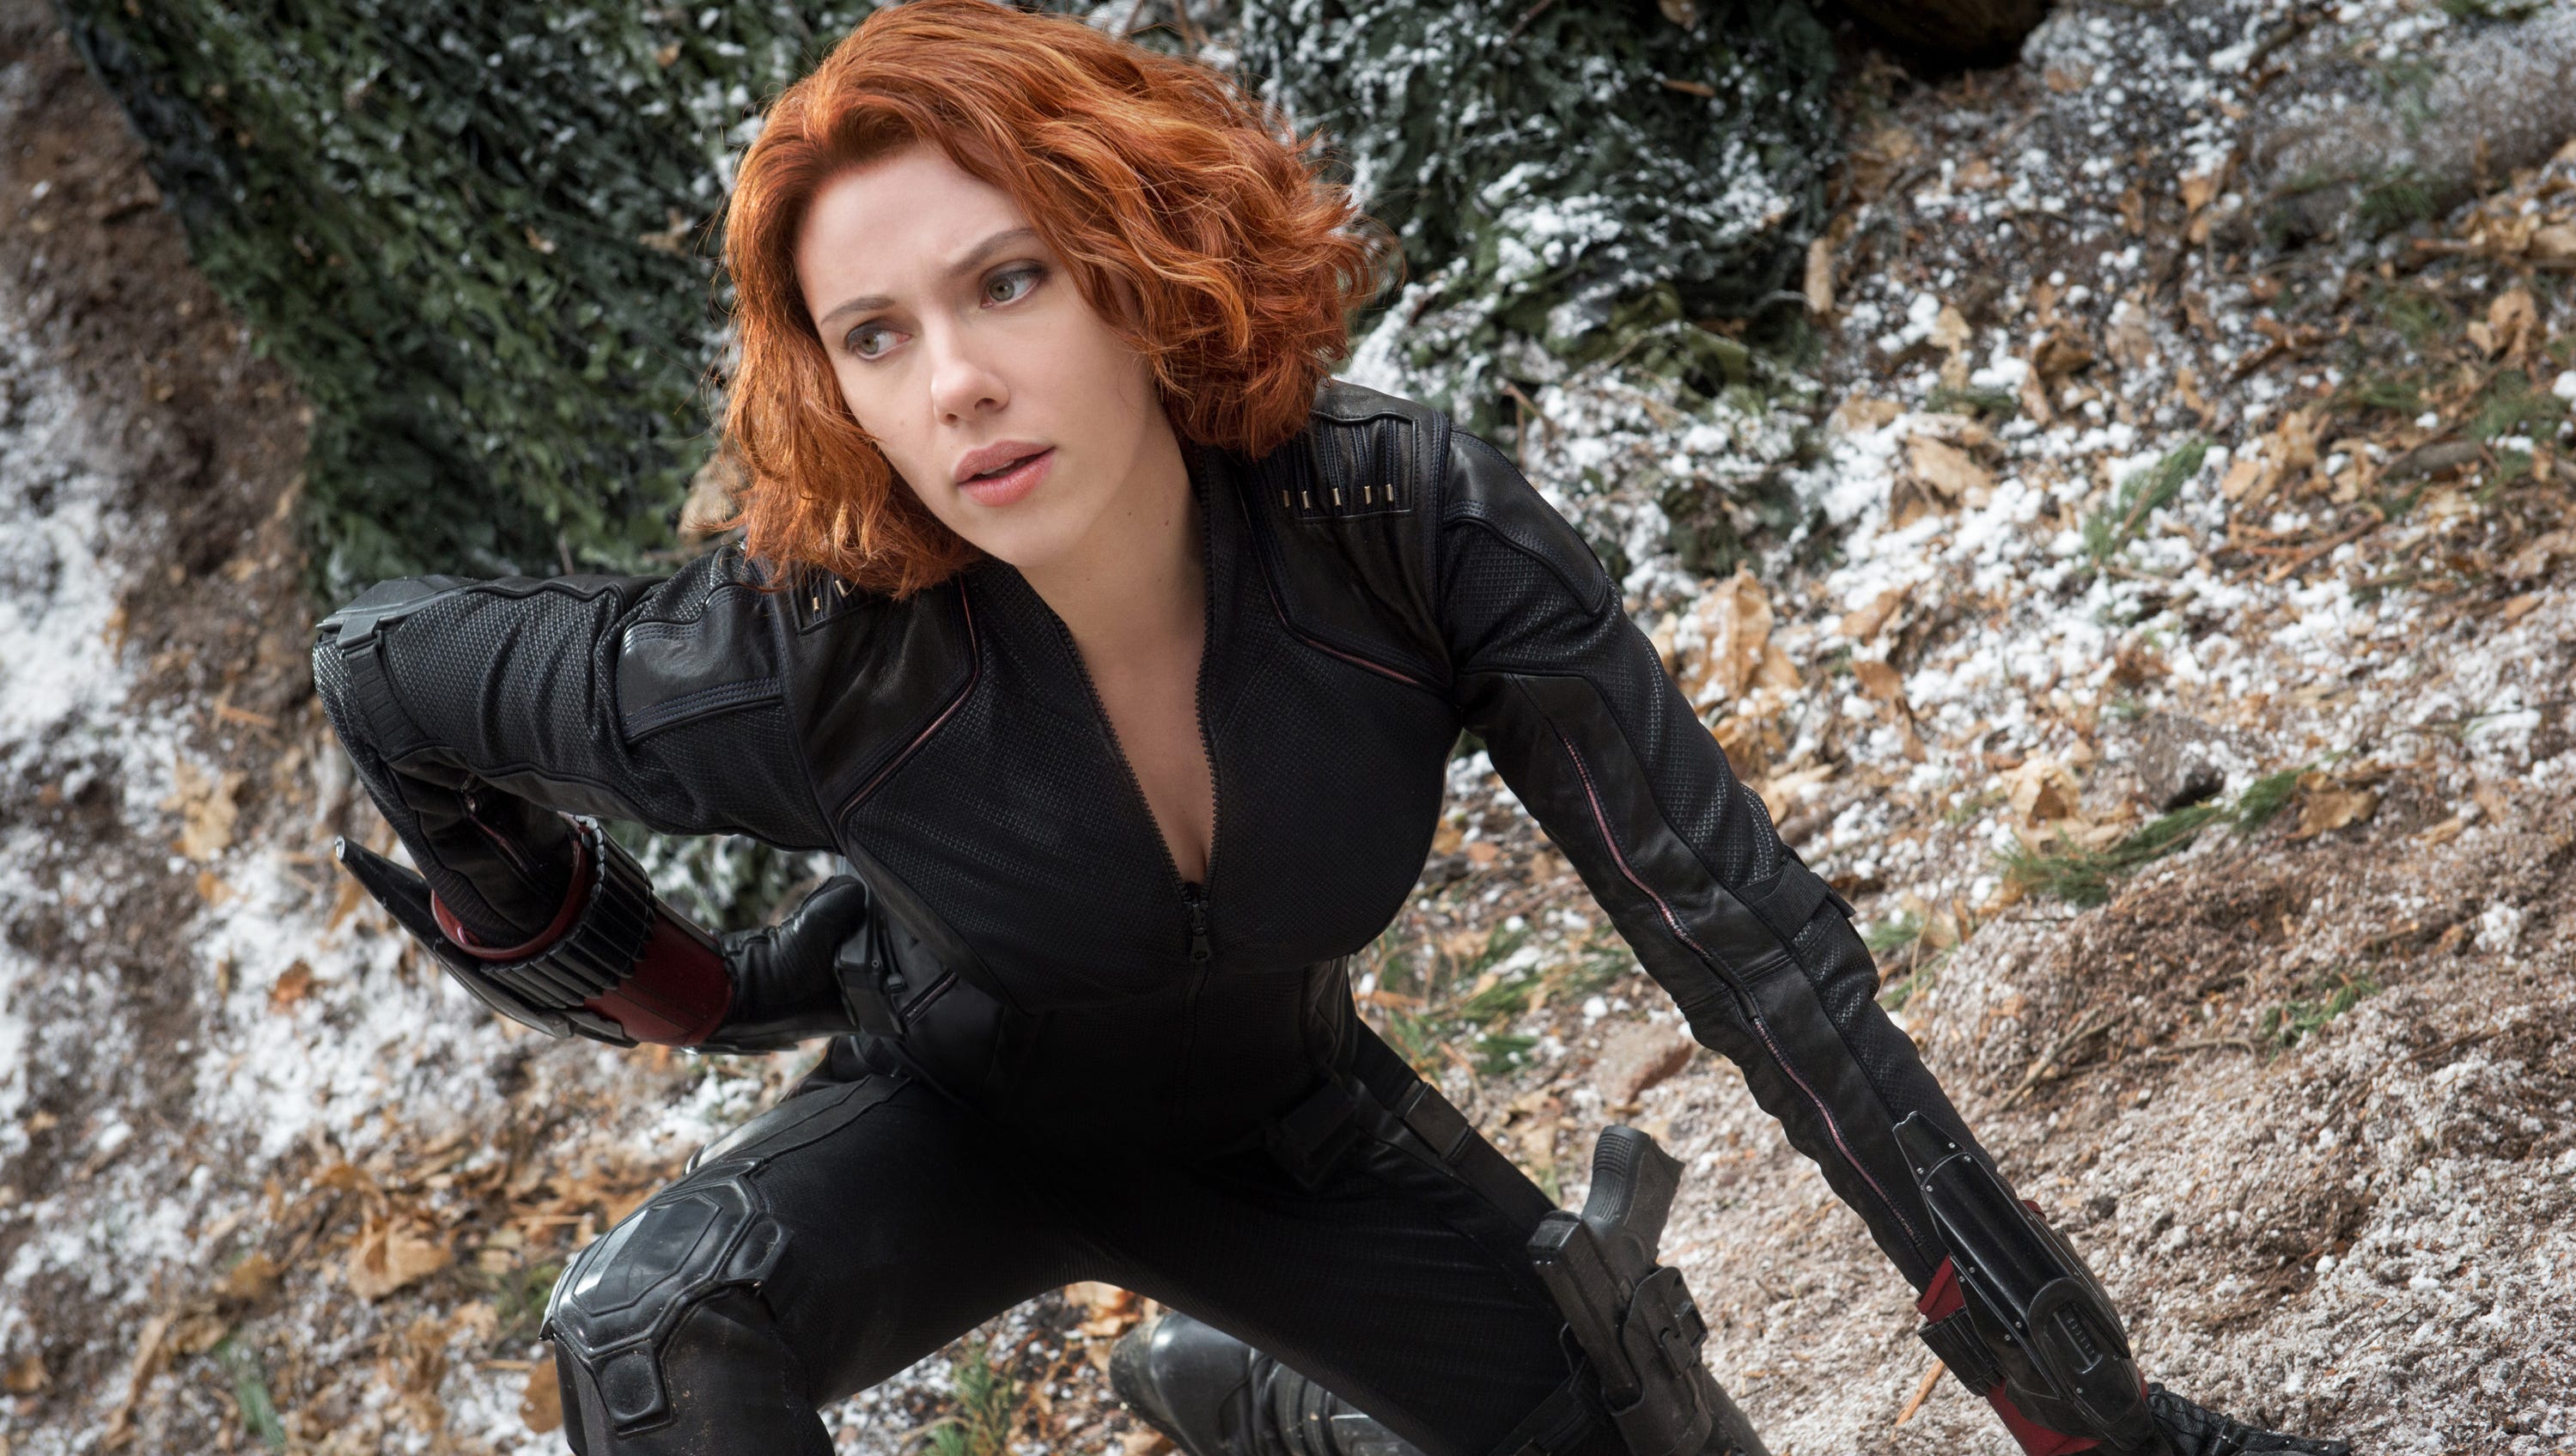 'Avengers' shoots for record opening